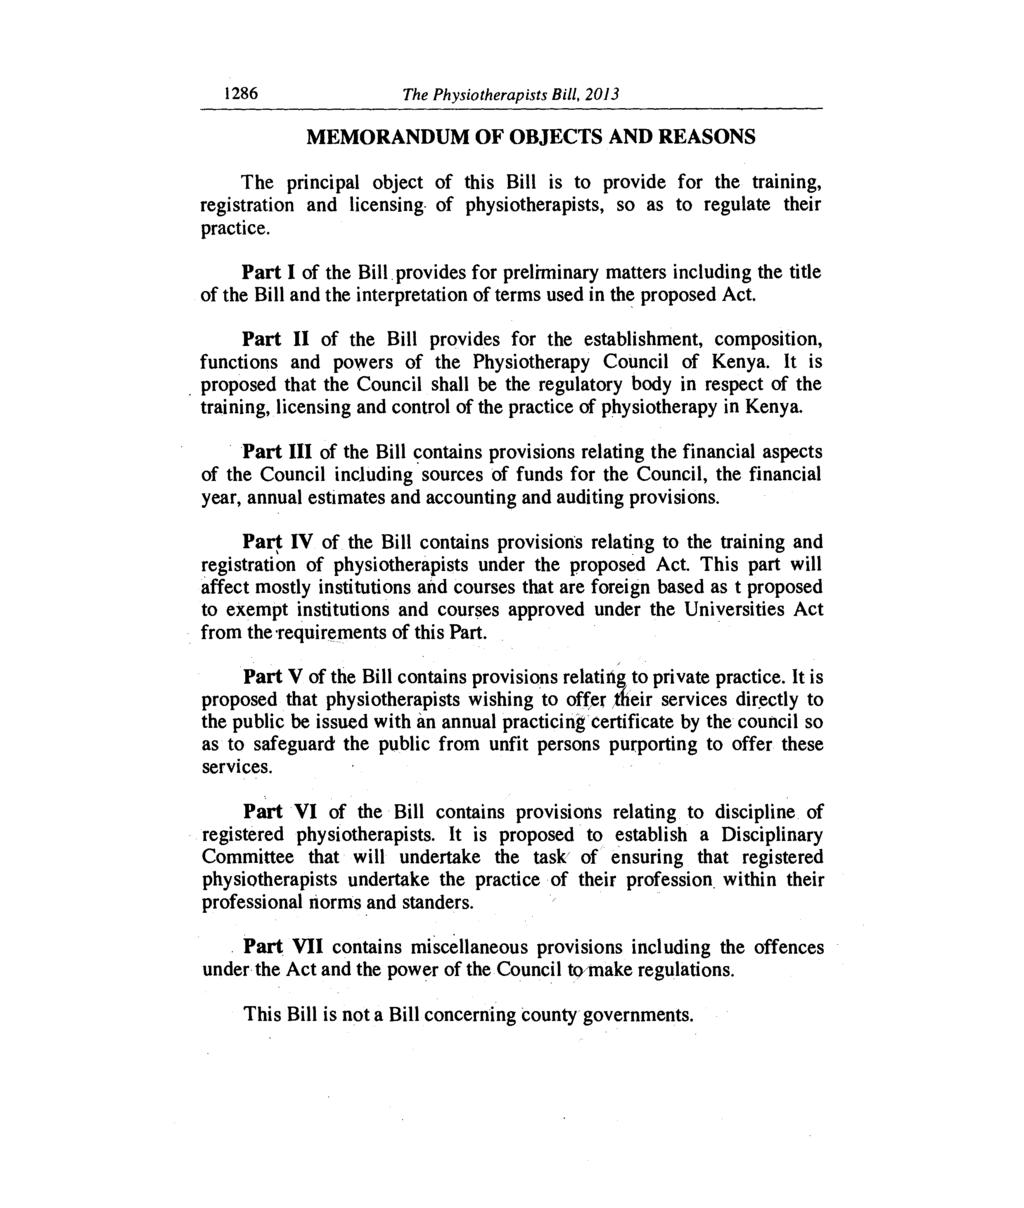 1286 The Physiotherapists Bill, 2013 MEMORANDUM OF OBJECTS AND REASONS The principal object of this Bill is to provide for the training, registration and licensing- of physiotherapists, so as to